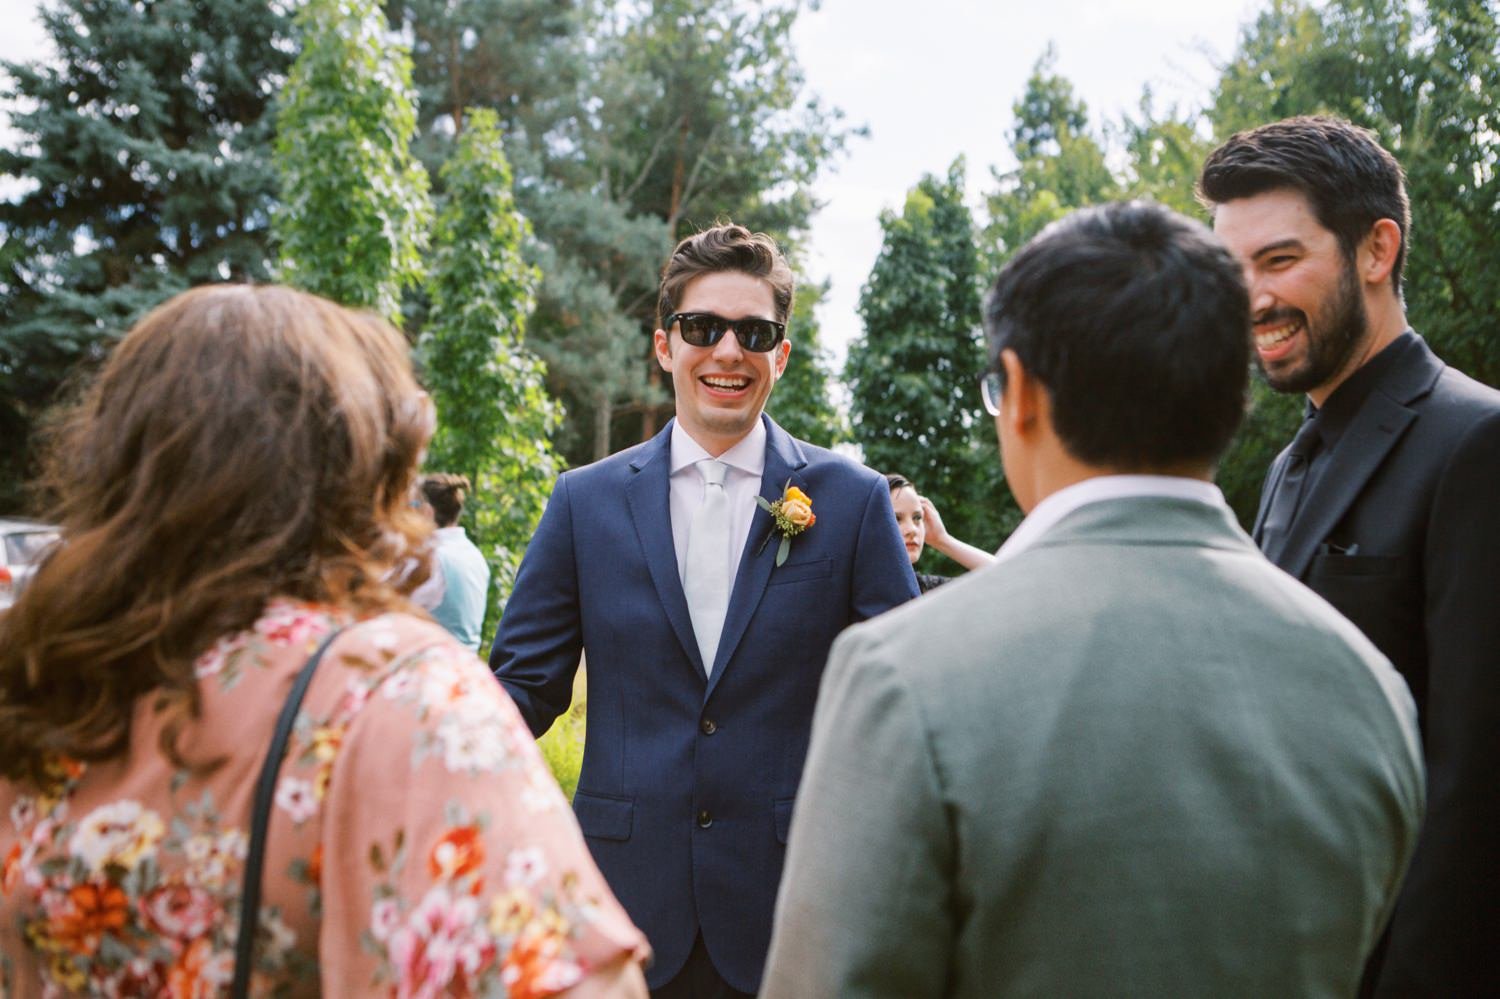  groom in navy blue tux and sunglasses is greeted by three people 